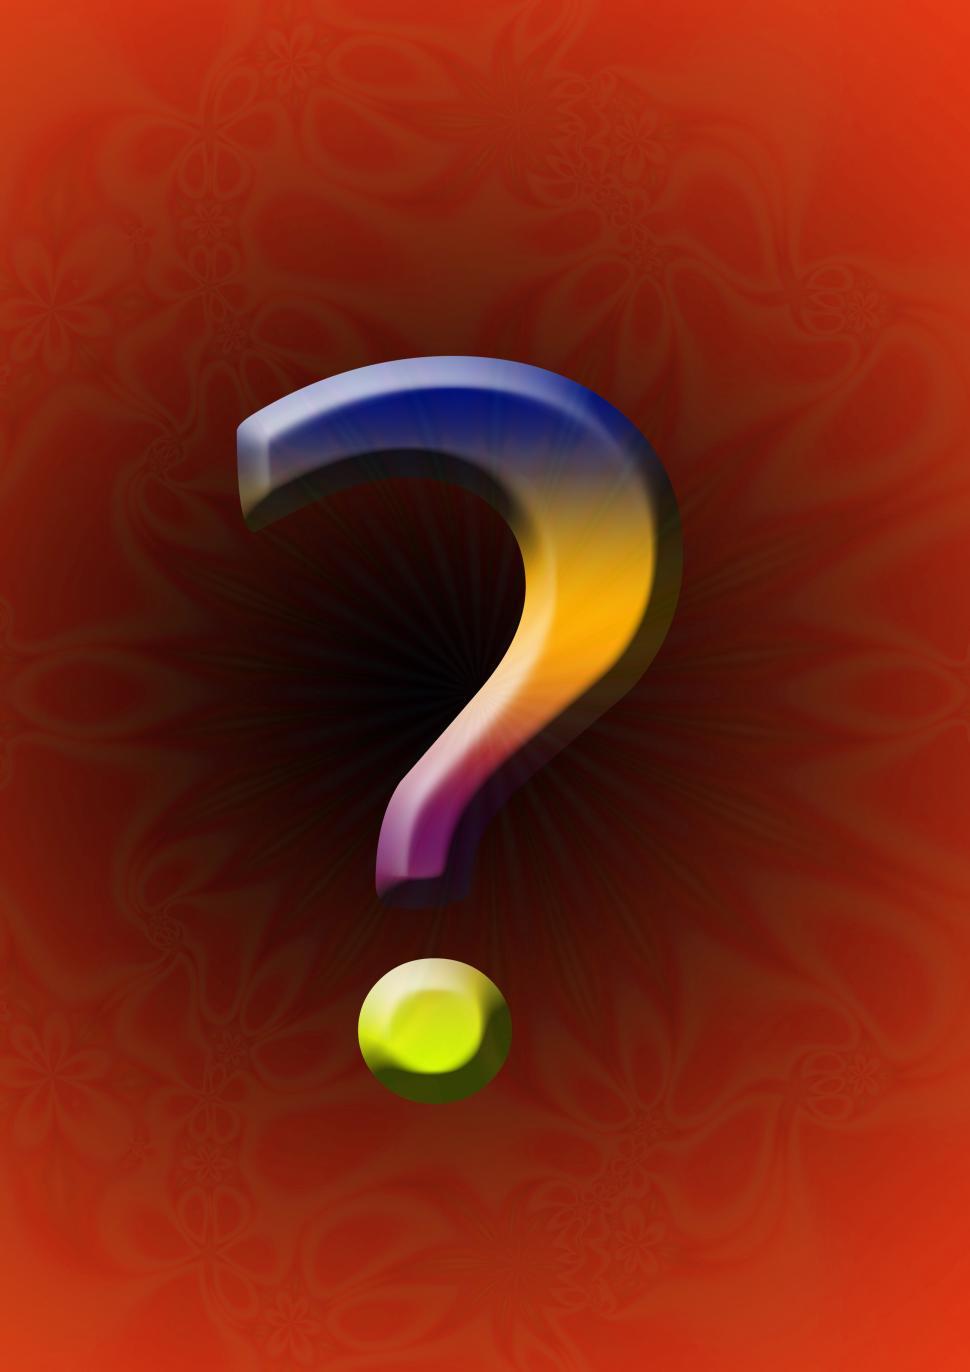 Download Question Mark Riddle Questions Royalty-Free Stock